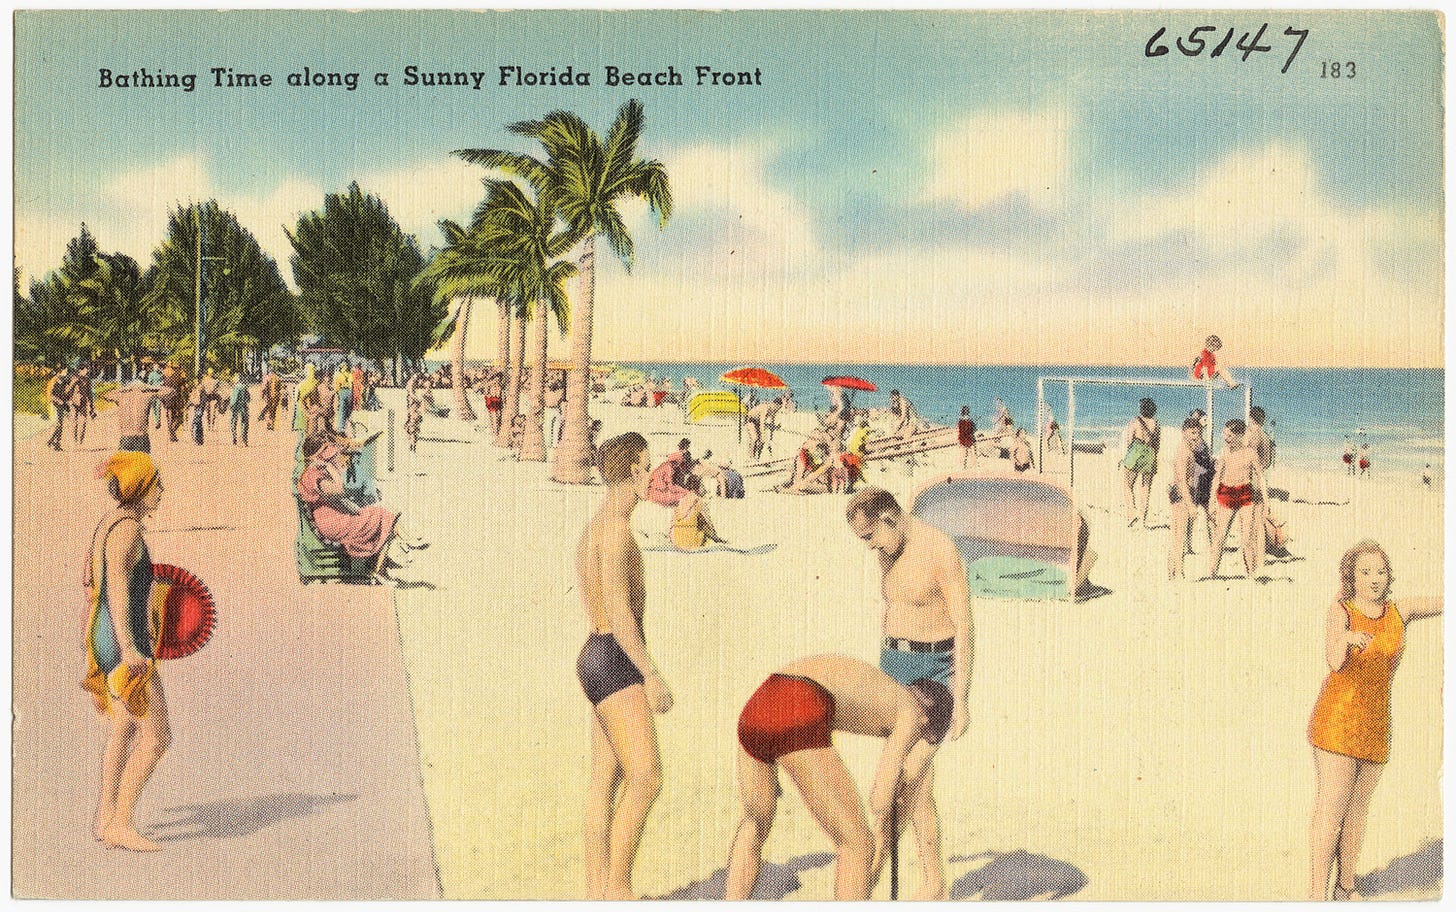 https://meaningness.com/images/meaningness/Sunny_Florida_Beach_Postcard.jpg